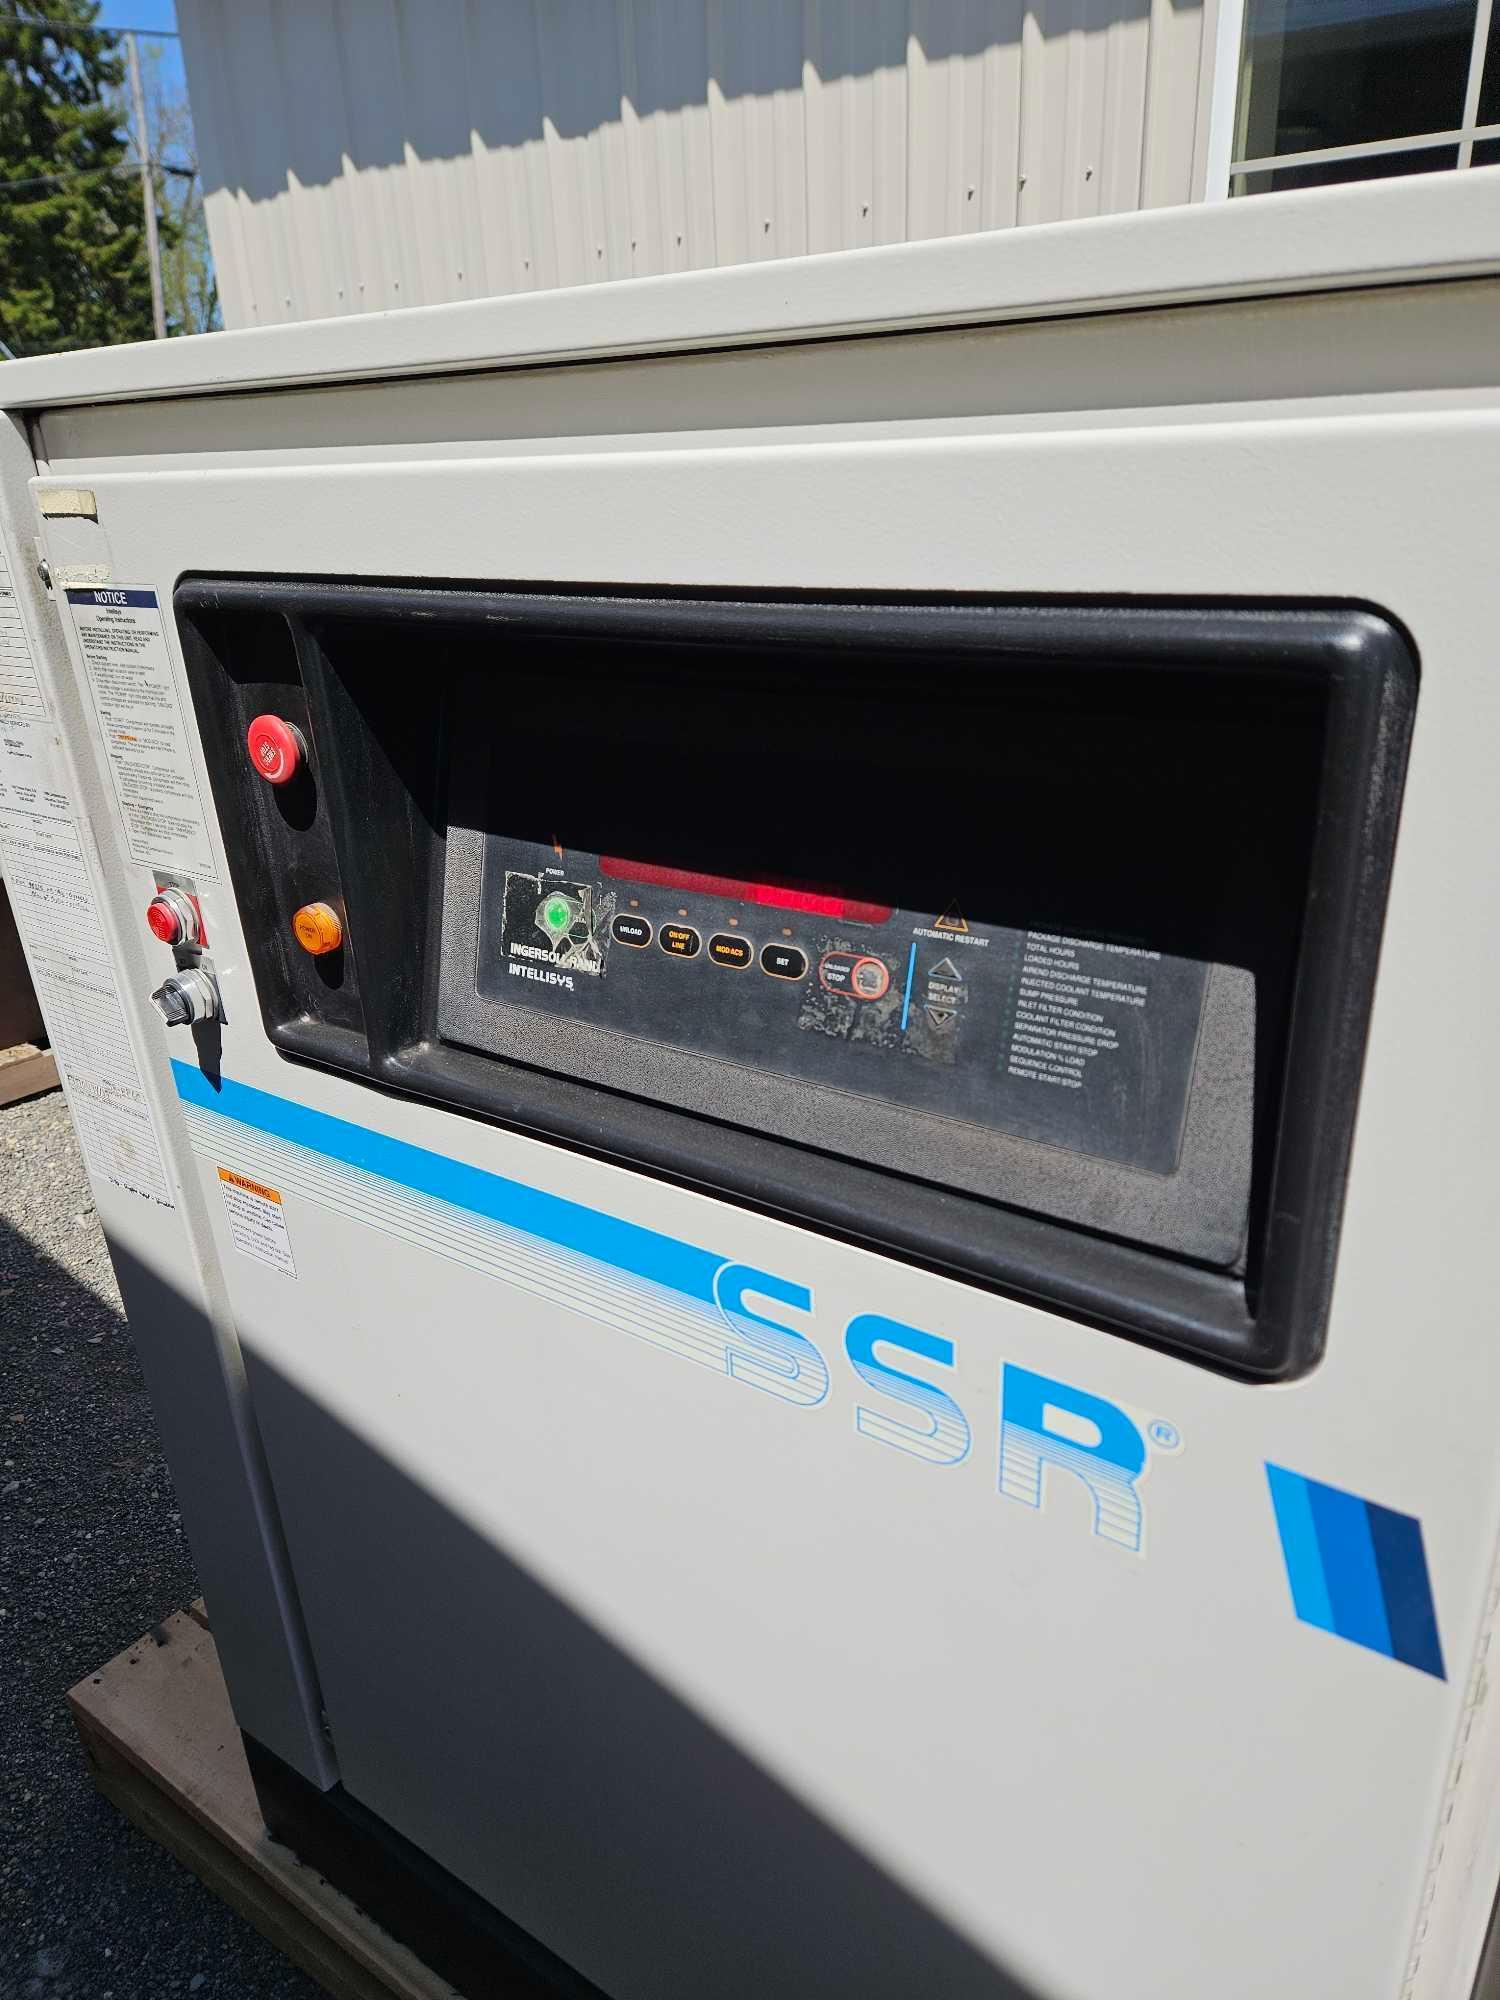 Ingersoll-Rand SSR-EP60 rotary screw air compressor and dryer, compressor model: SSR-EP60